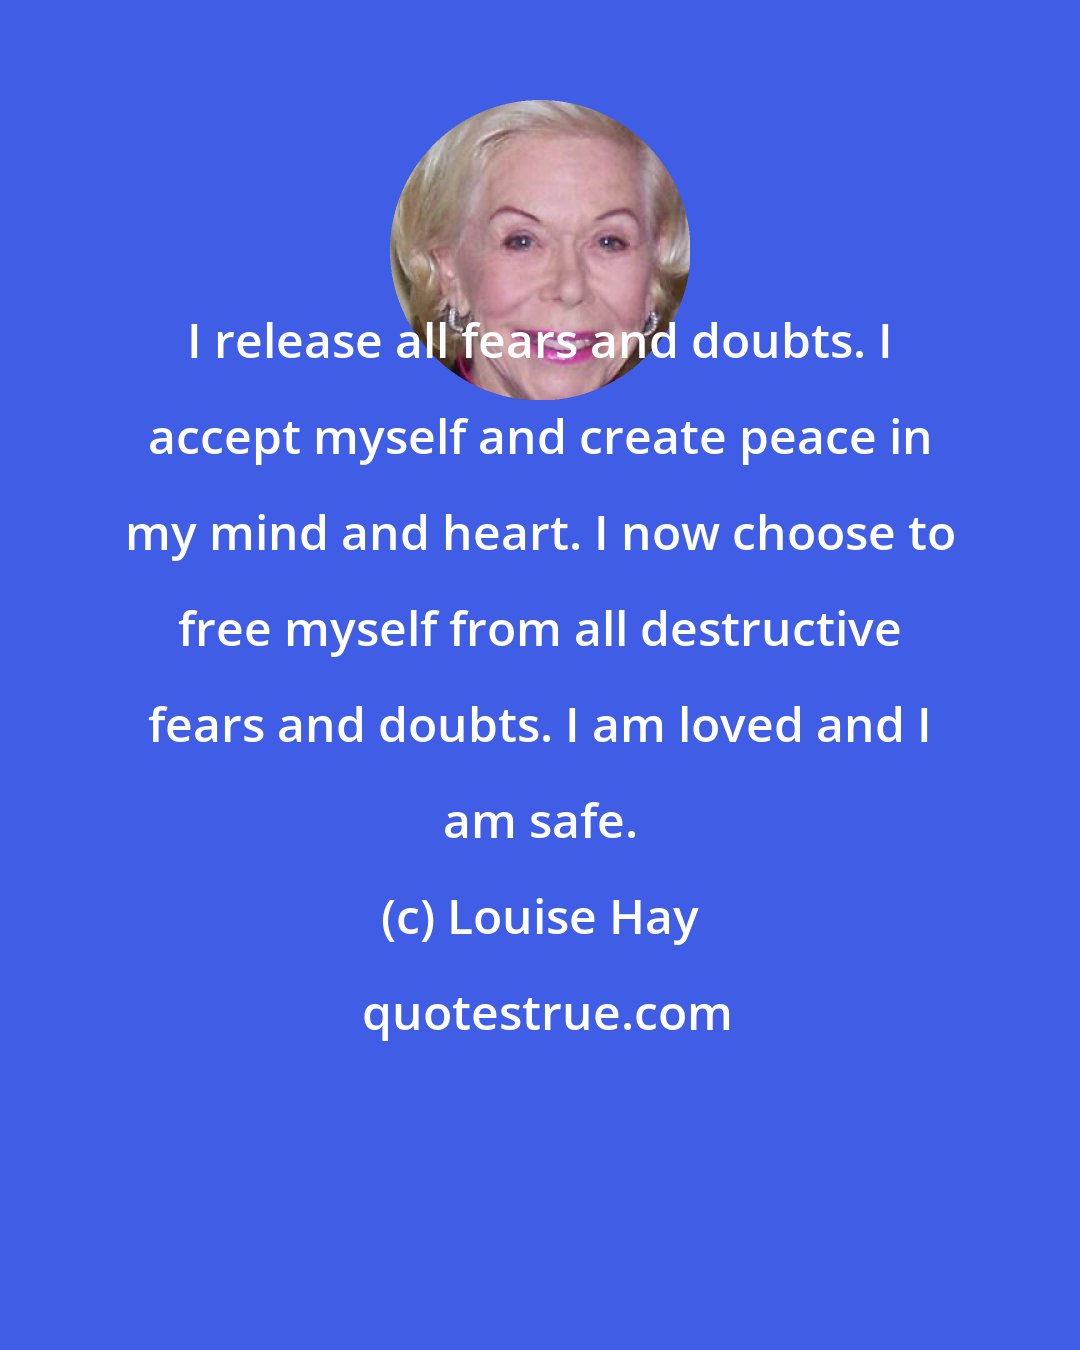 Louise Hay: I release all fears and doubts. I accept myself and create peace in my mind and heart. I now choose to free myself from all destructive fears and doubts. I am loved and I am safe.